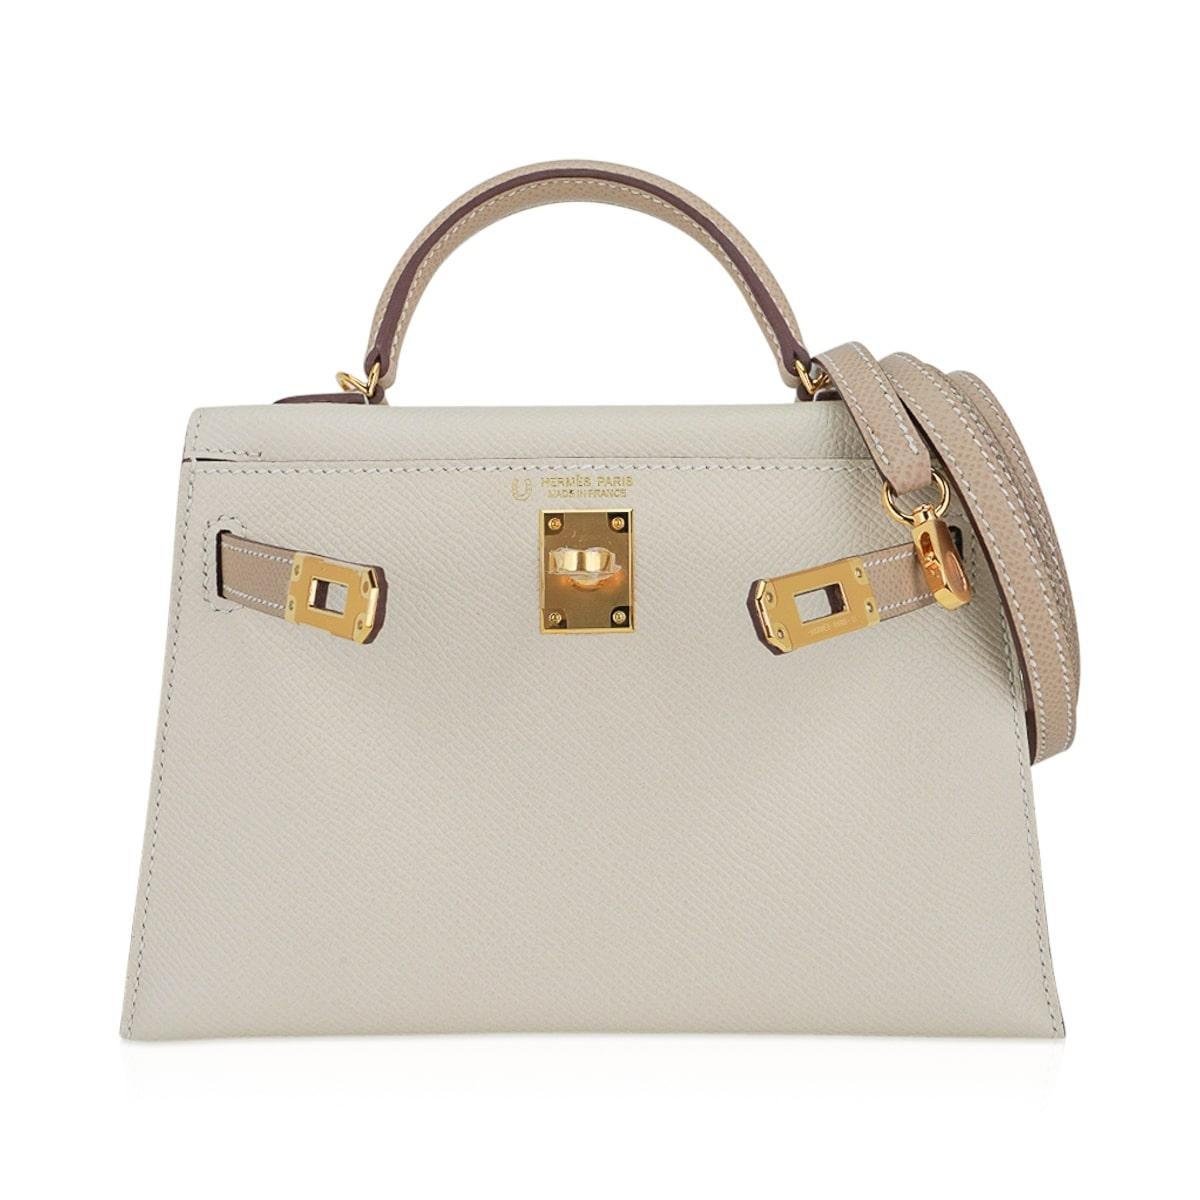 Hermes Kelly HSS 20 Sellier Nata & Trench Mini Bag Gold Hardware Epsom Leather In New Condition For Sale In Miami, FL